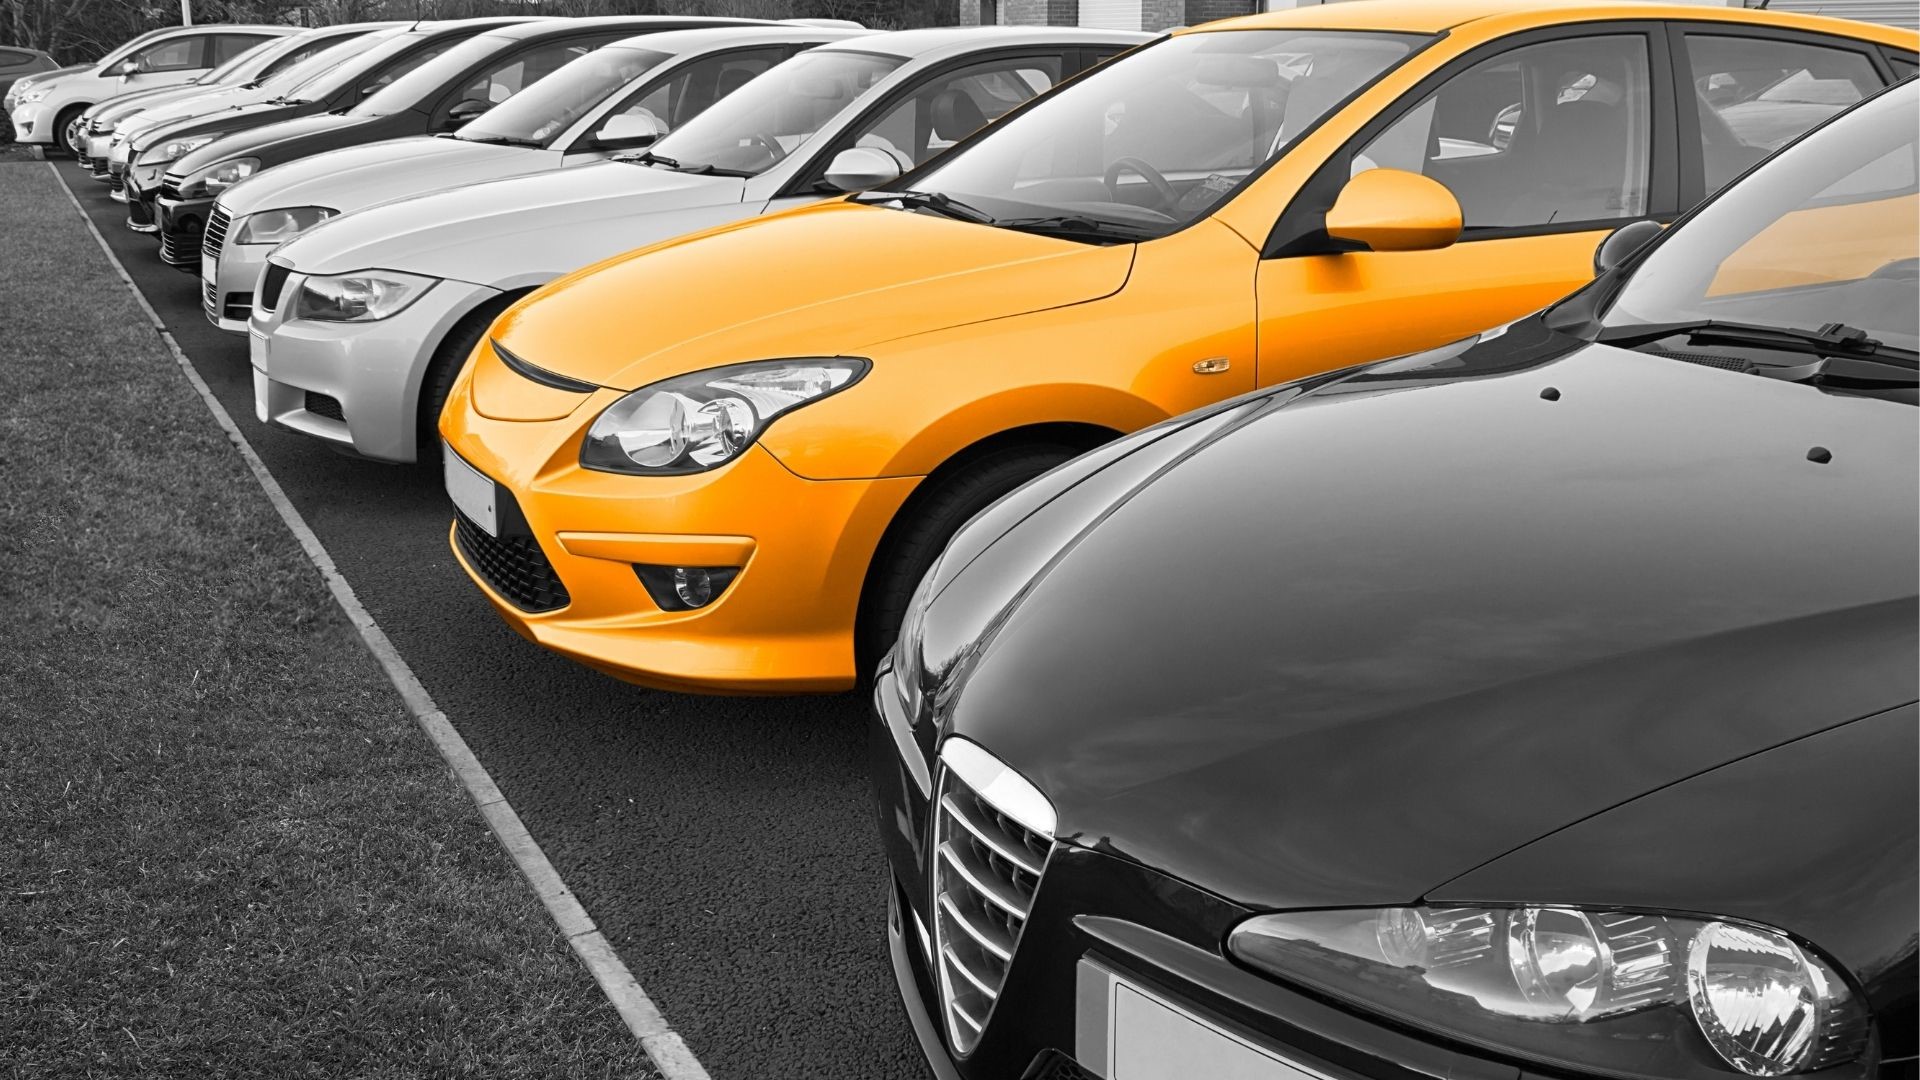 Used cars have never been worth more. That's why it might be the right time to sell ... if you can afford to give up your vehicle.